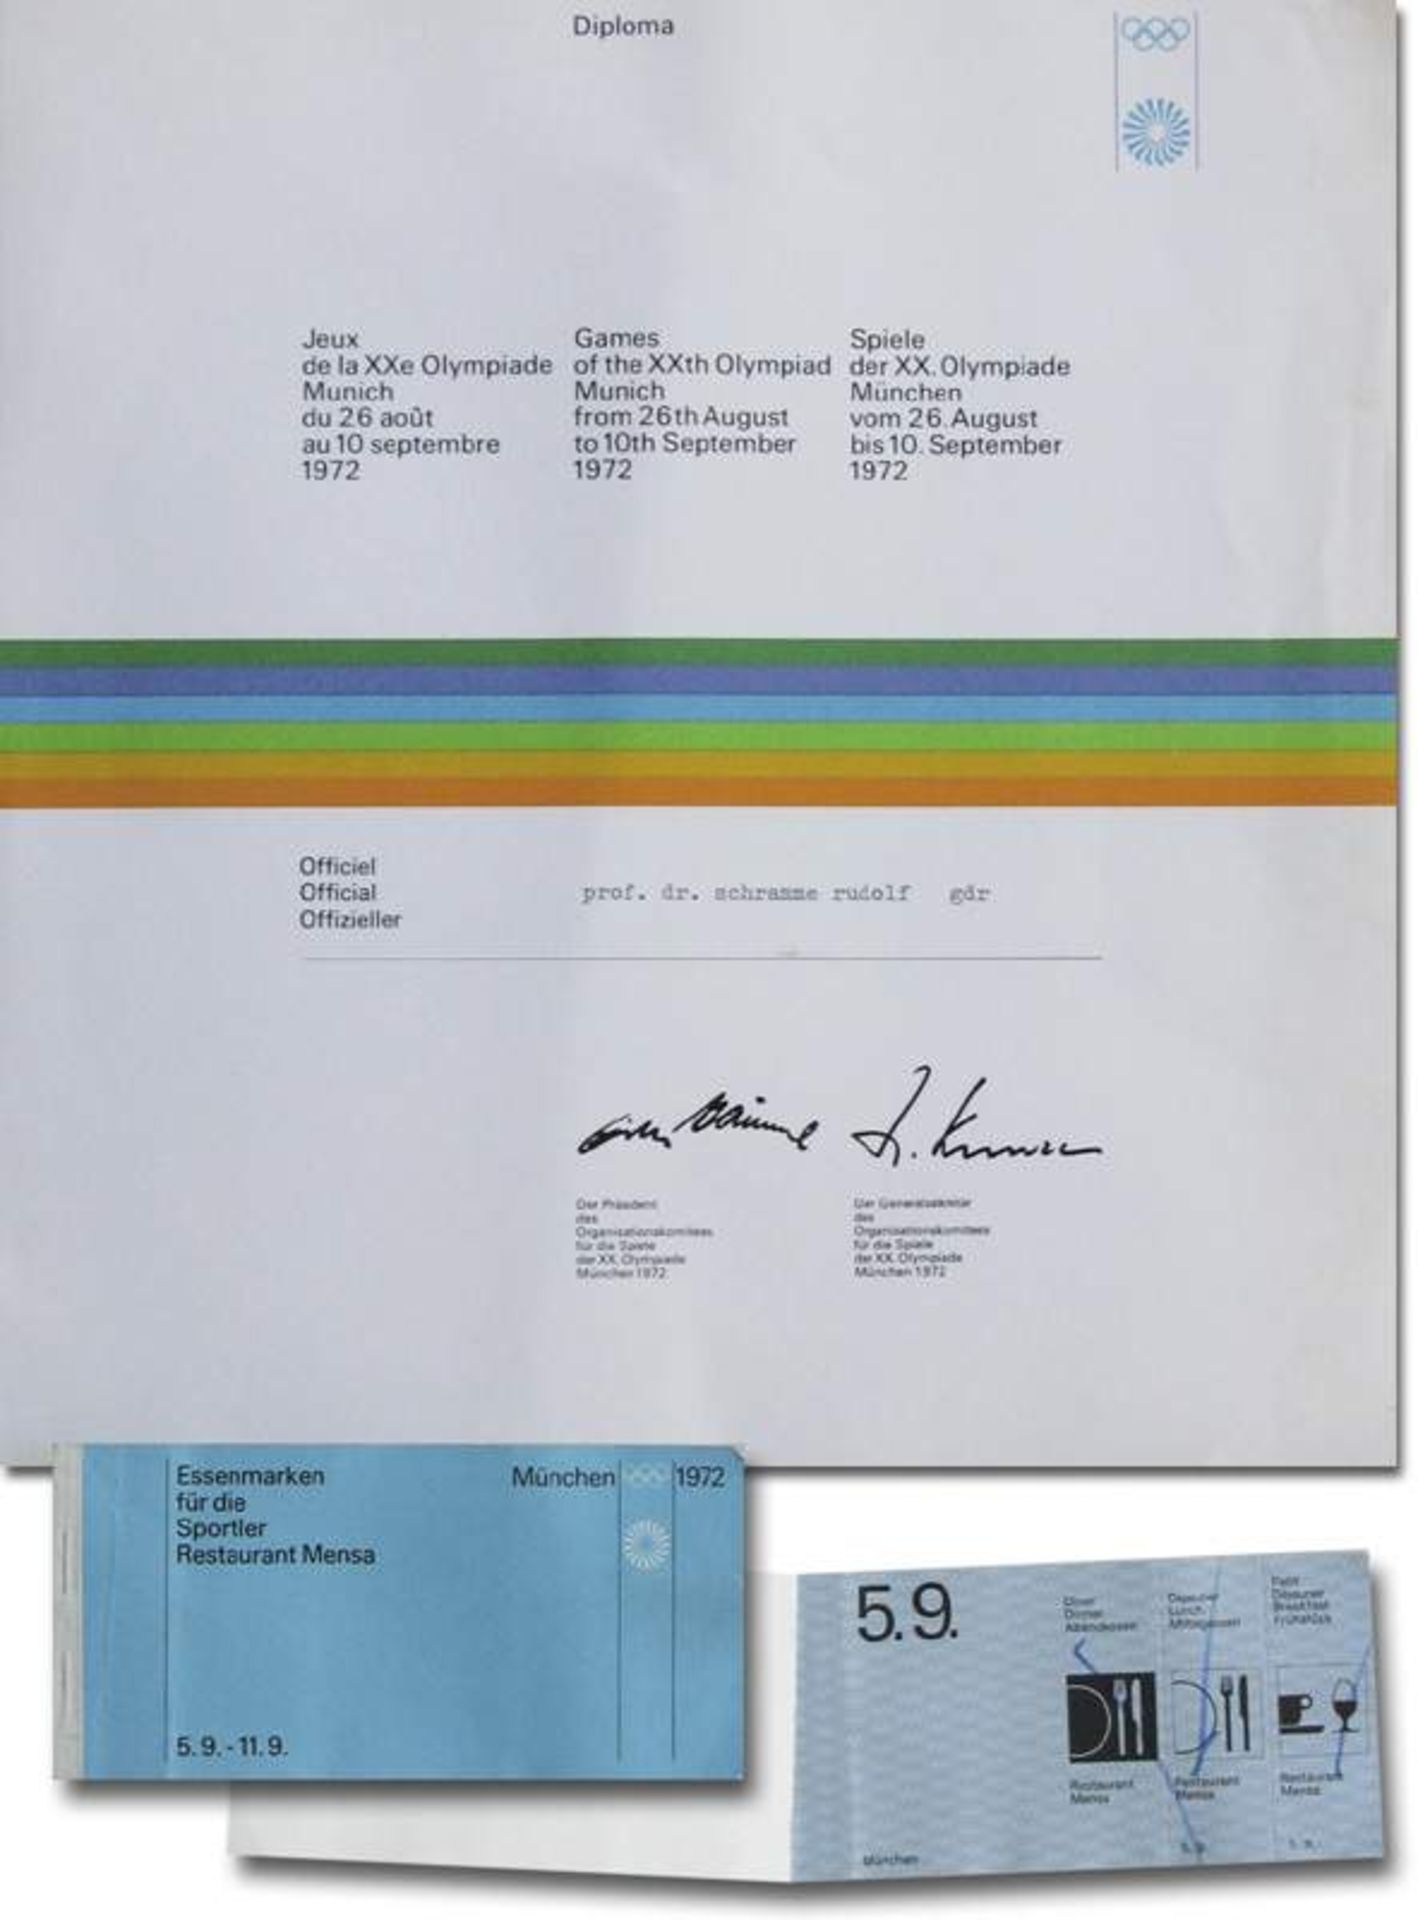 Olympic Games Munich 1972. Participation diploma - For officials. Dilpoma for GDR Swimming Coach